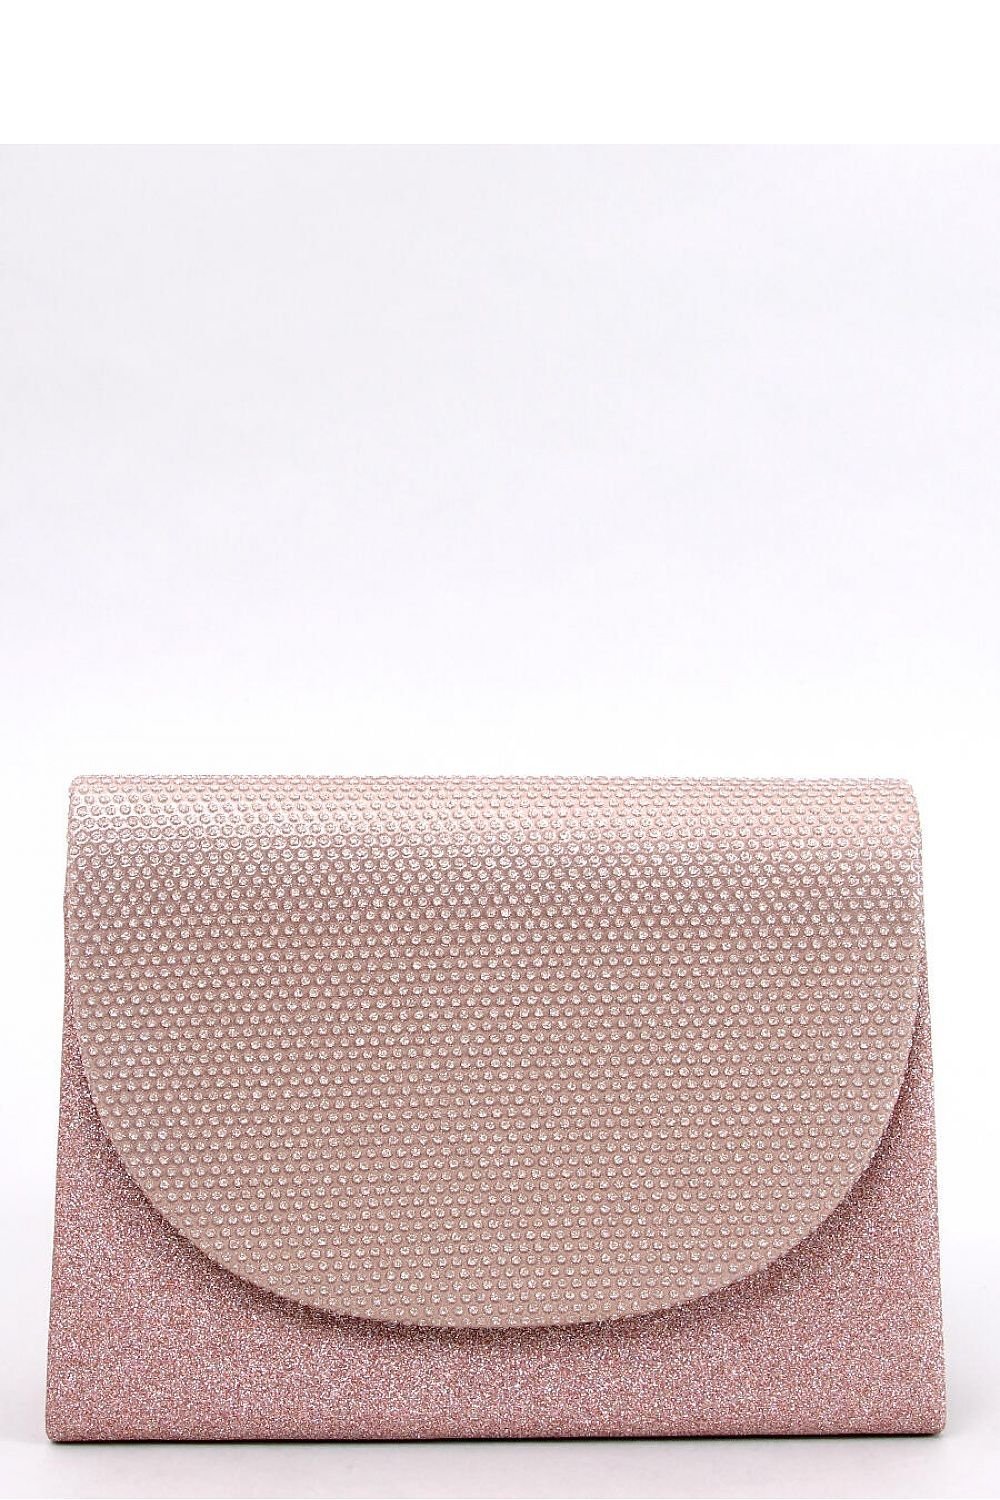 Envelope clutch bag - M&H FashionEnvelope clutch bagM&H FashionM&H Fashion189610_1103868one-size-fits-allEnvelope clutch bag InelloM&H FashionM&H FashionVisiting handbag - a clutch bag for women. It can be worn in two ways ? classically in hand or on a delicate chain. It is fastened with a magnetic clasp, and inside Envelope clutch bag